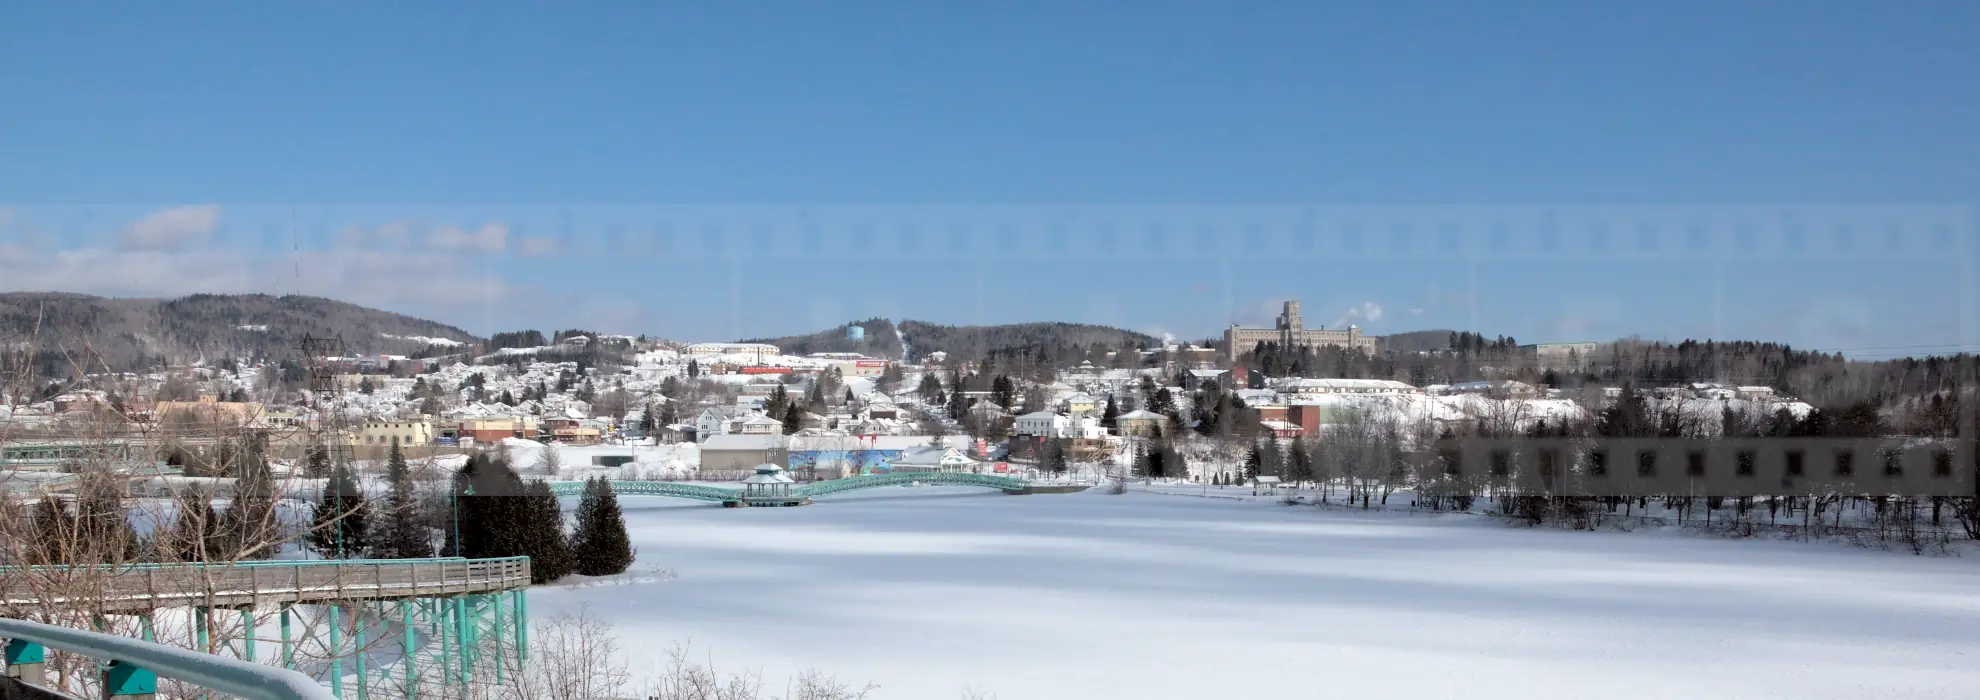 Frozen lake and snow-covered winter cityscape of Edmundston in Canada